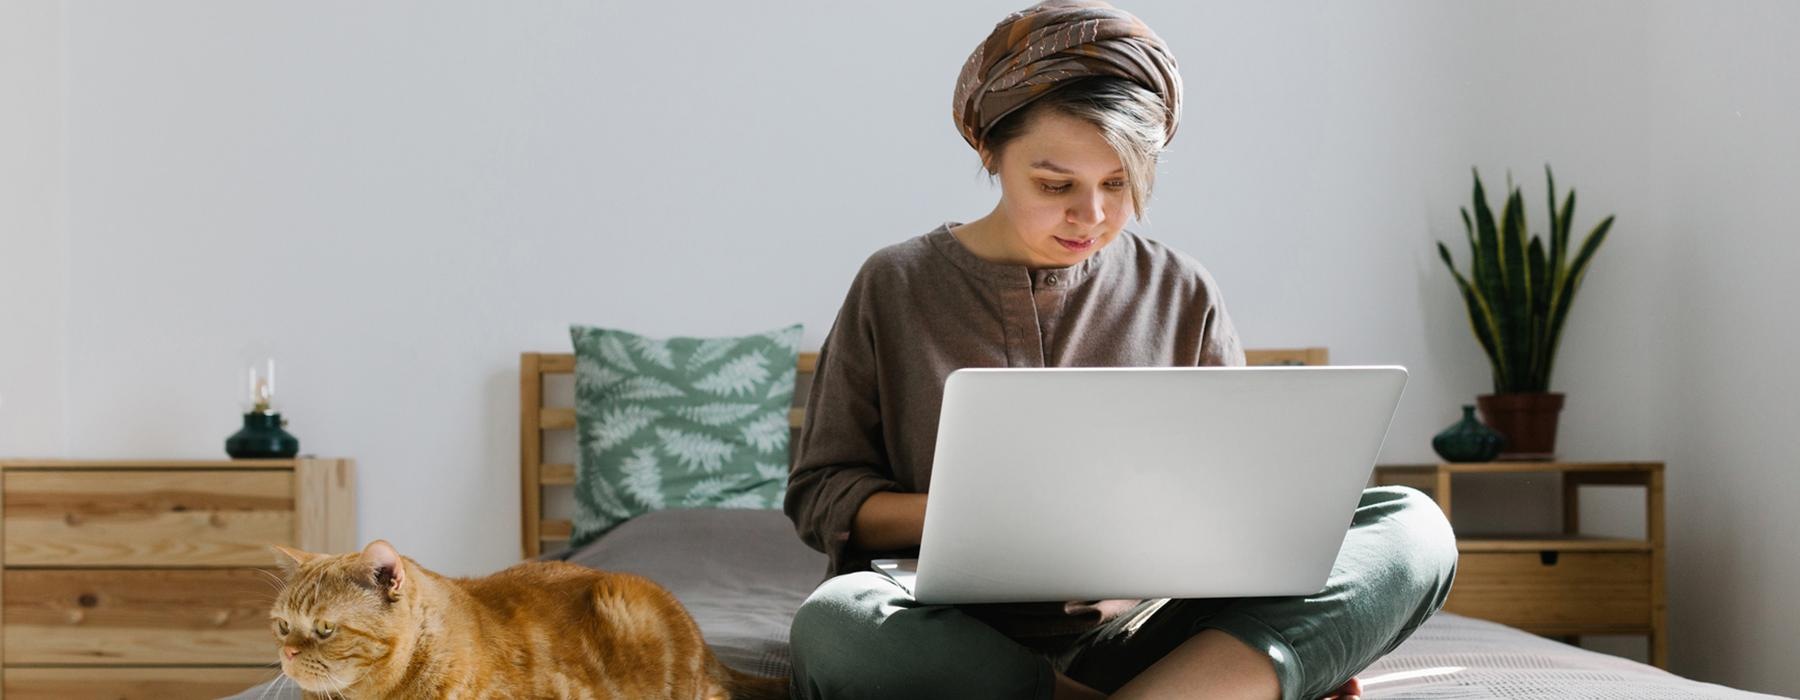 a child sitting on a bed with a laptop and a cat